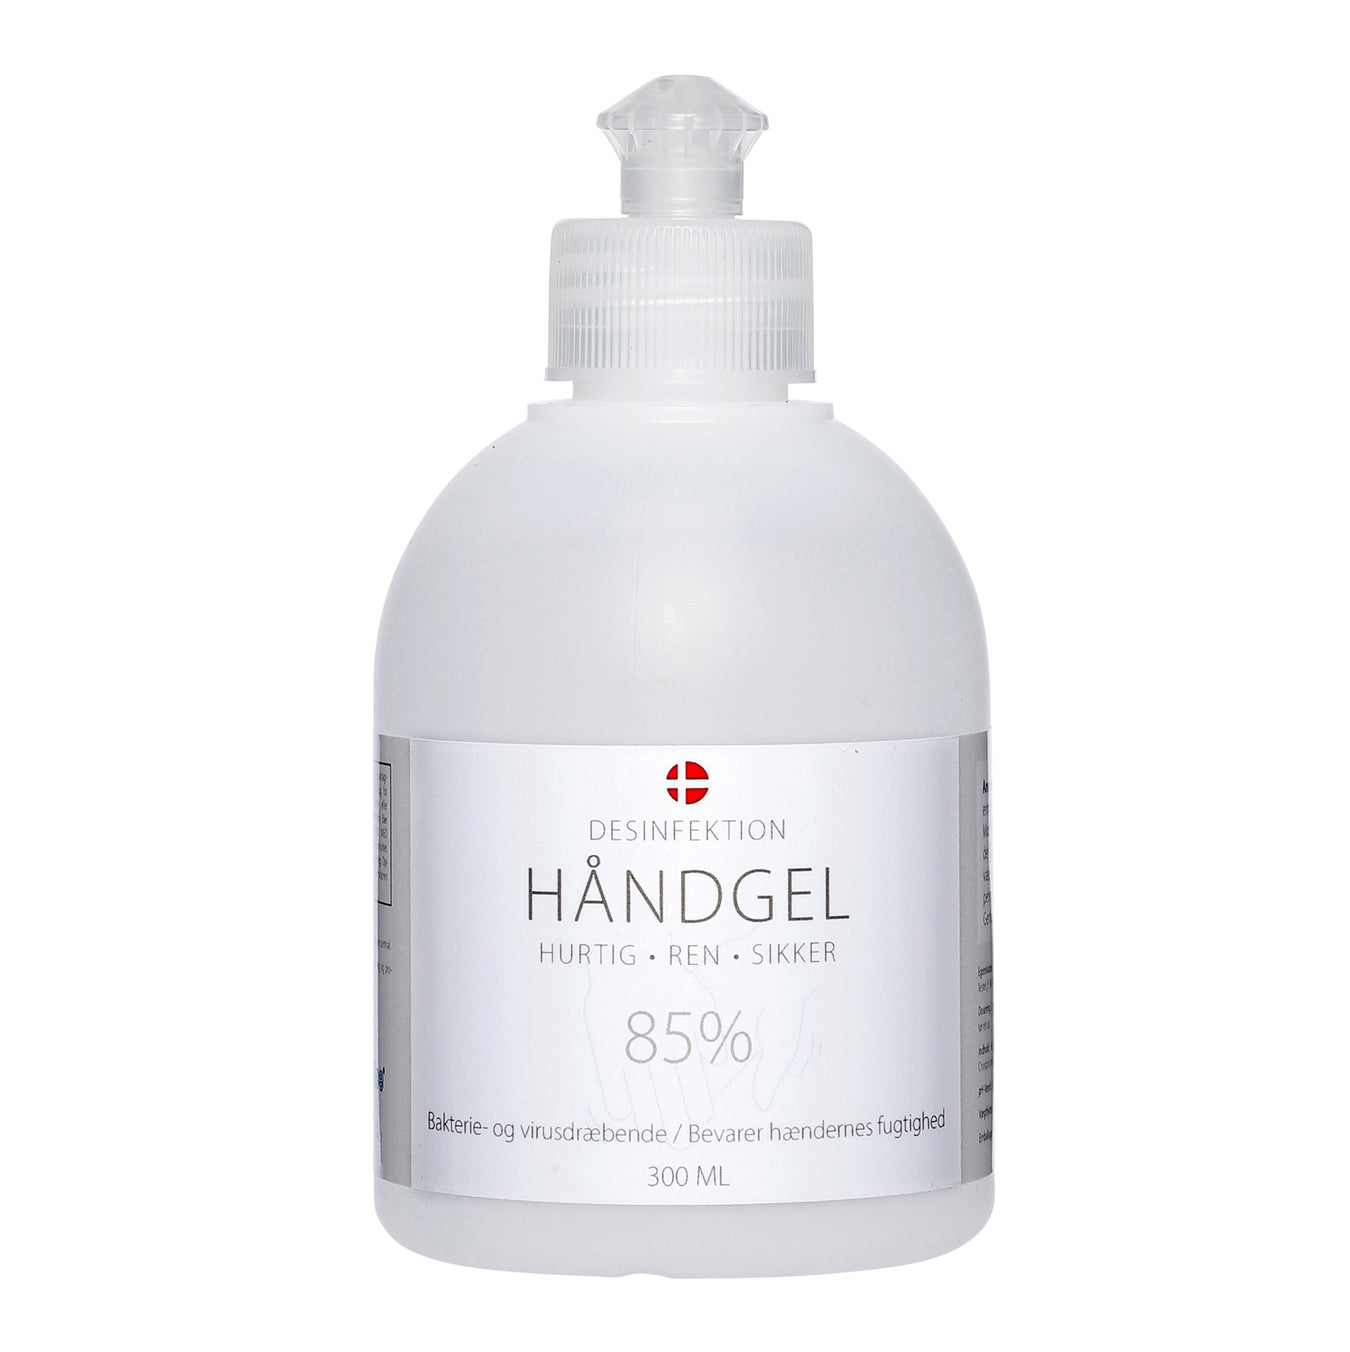 Hand disinfection